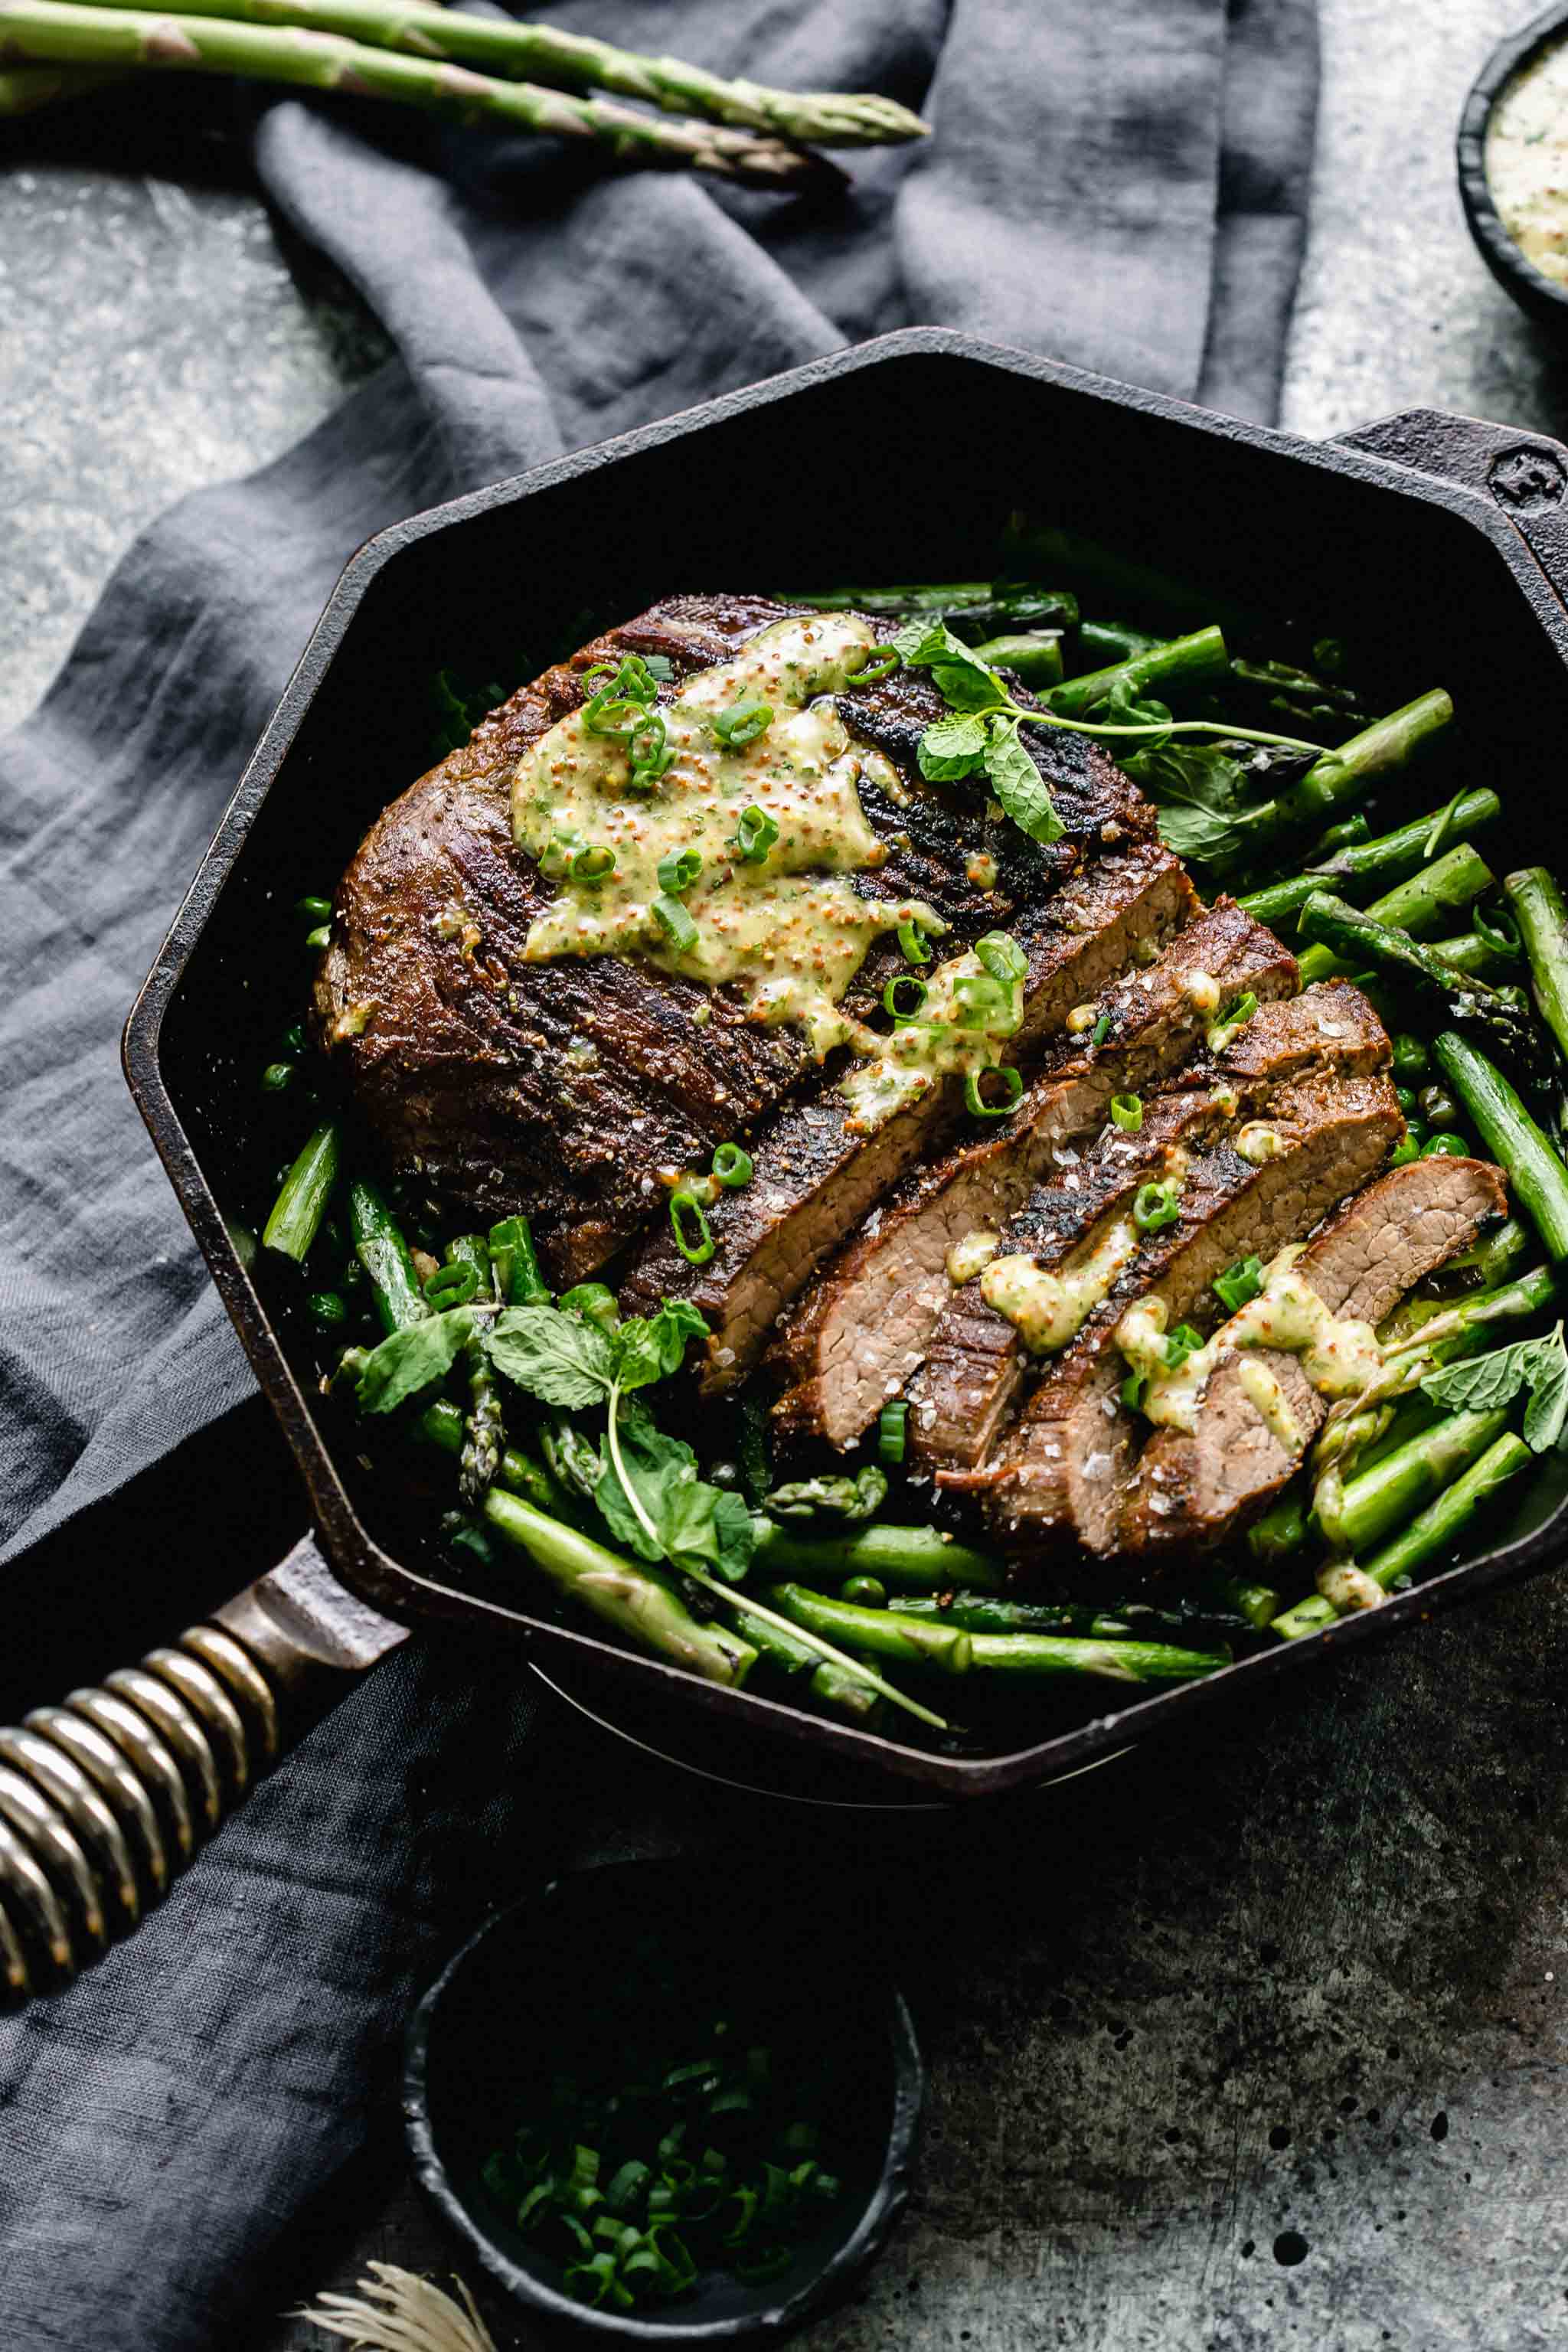 Skillet steak with mint mustard sauce drizzled on it.